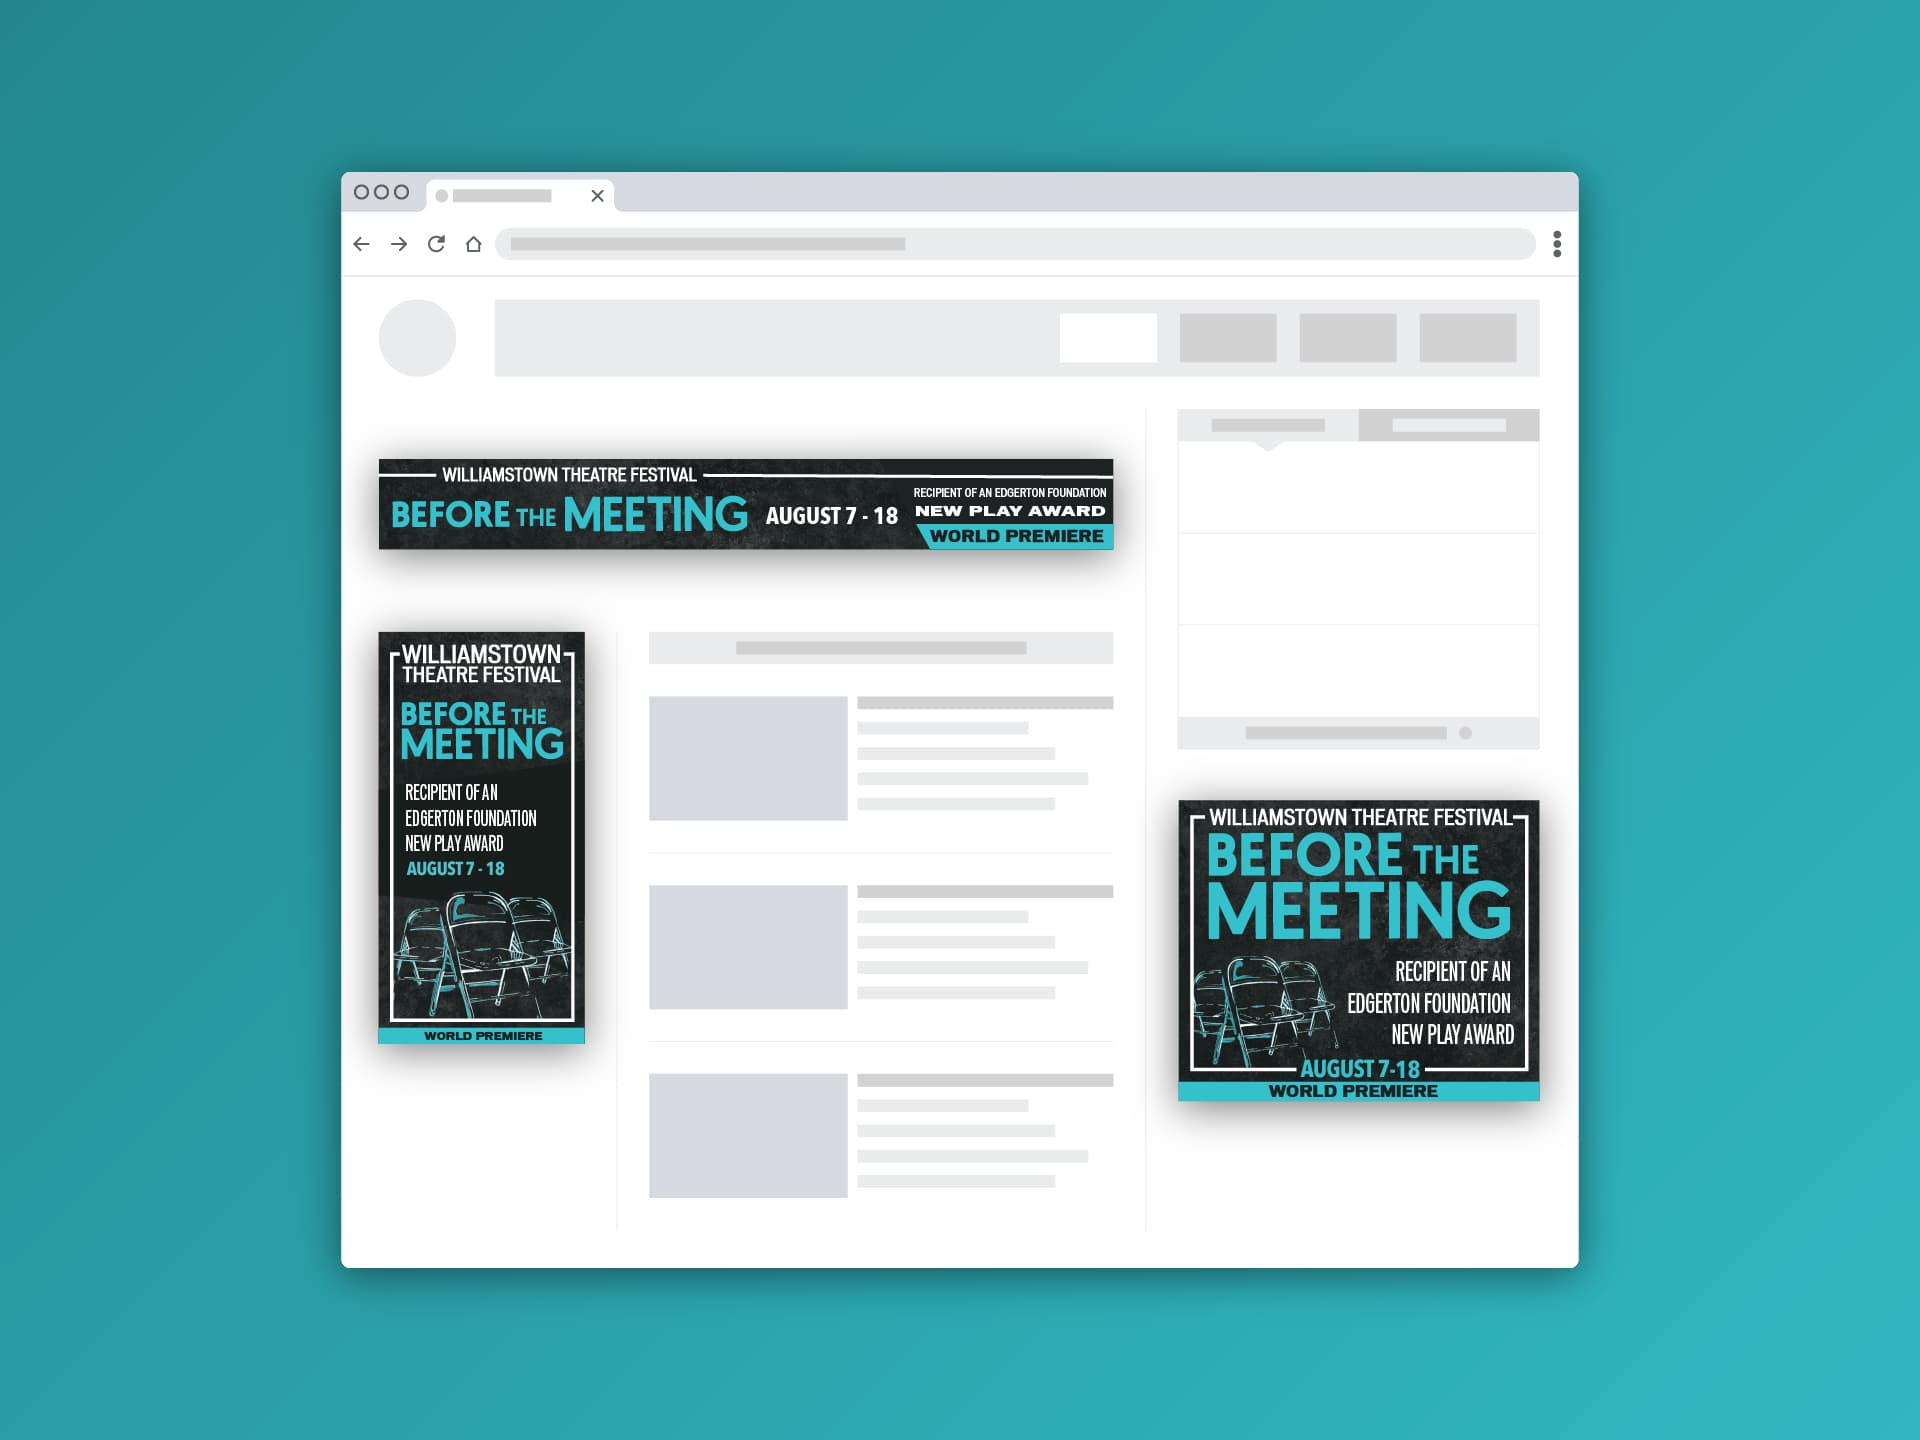 “Before the Meeting” banner ads